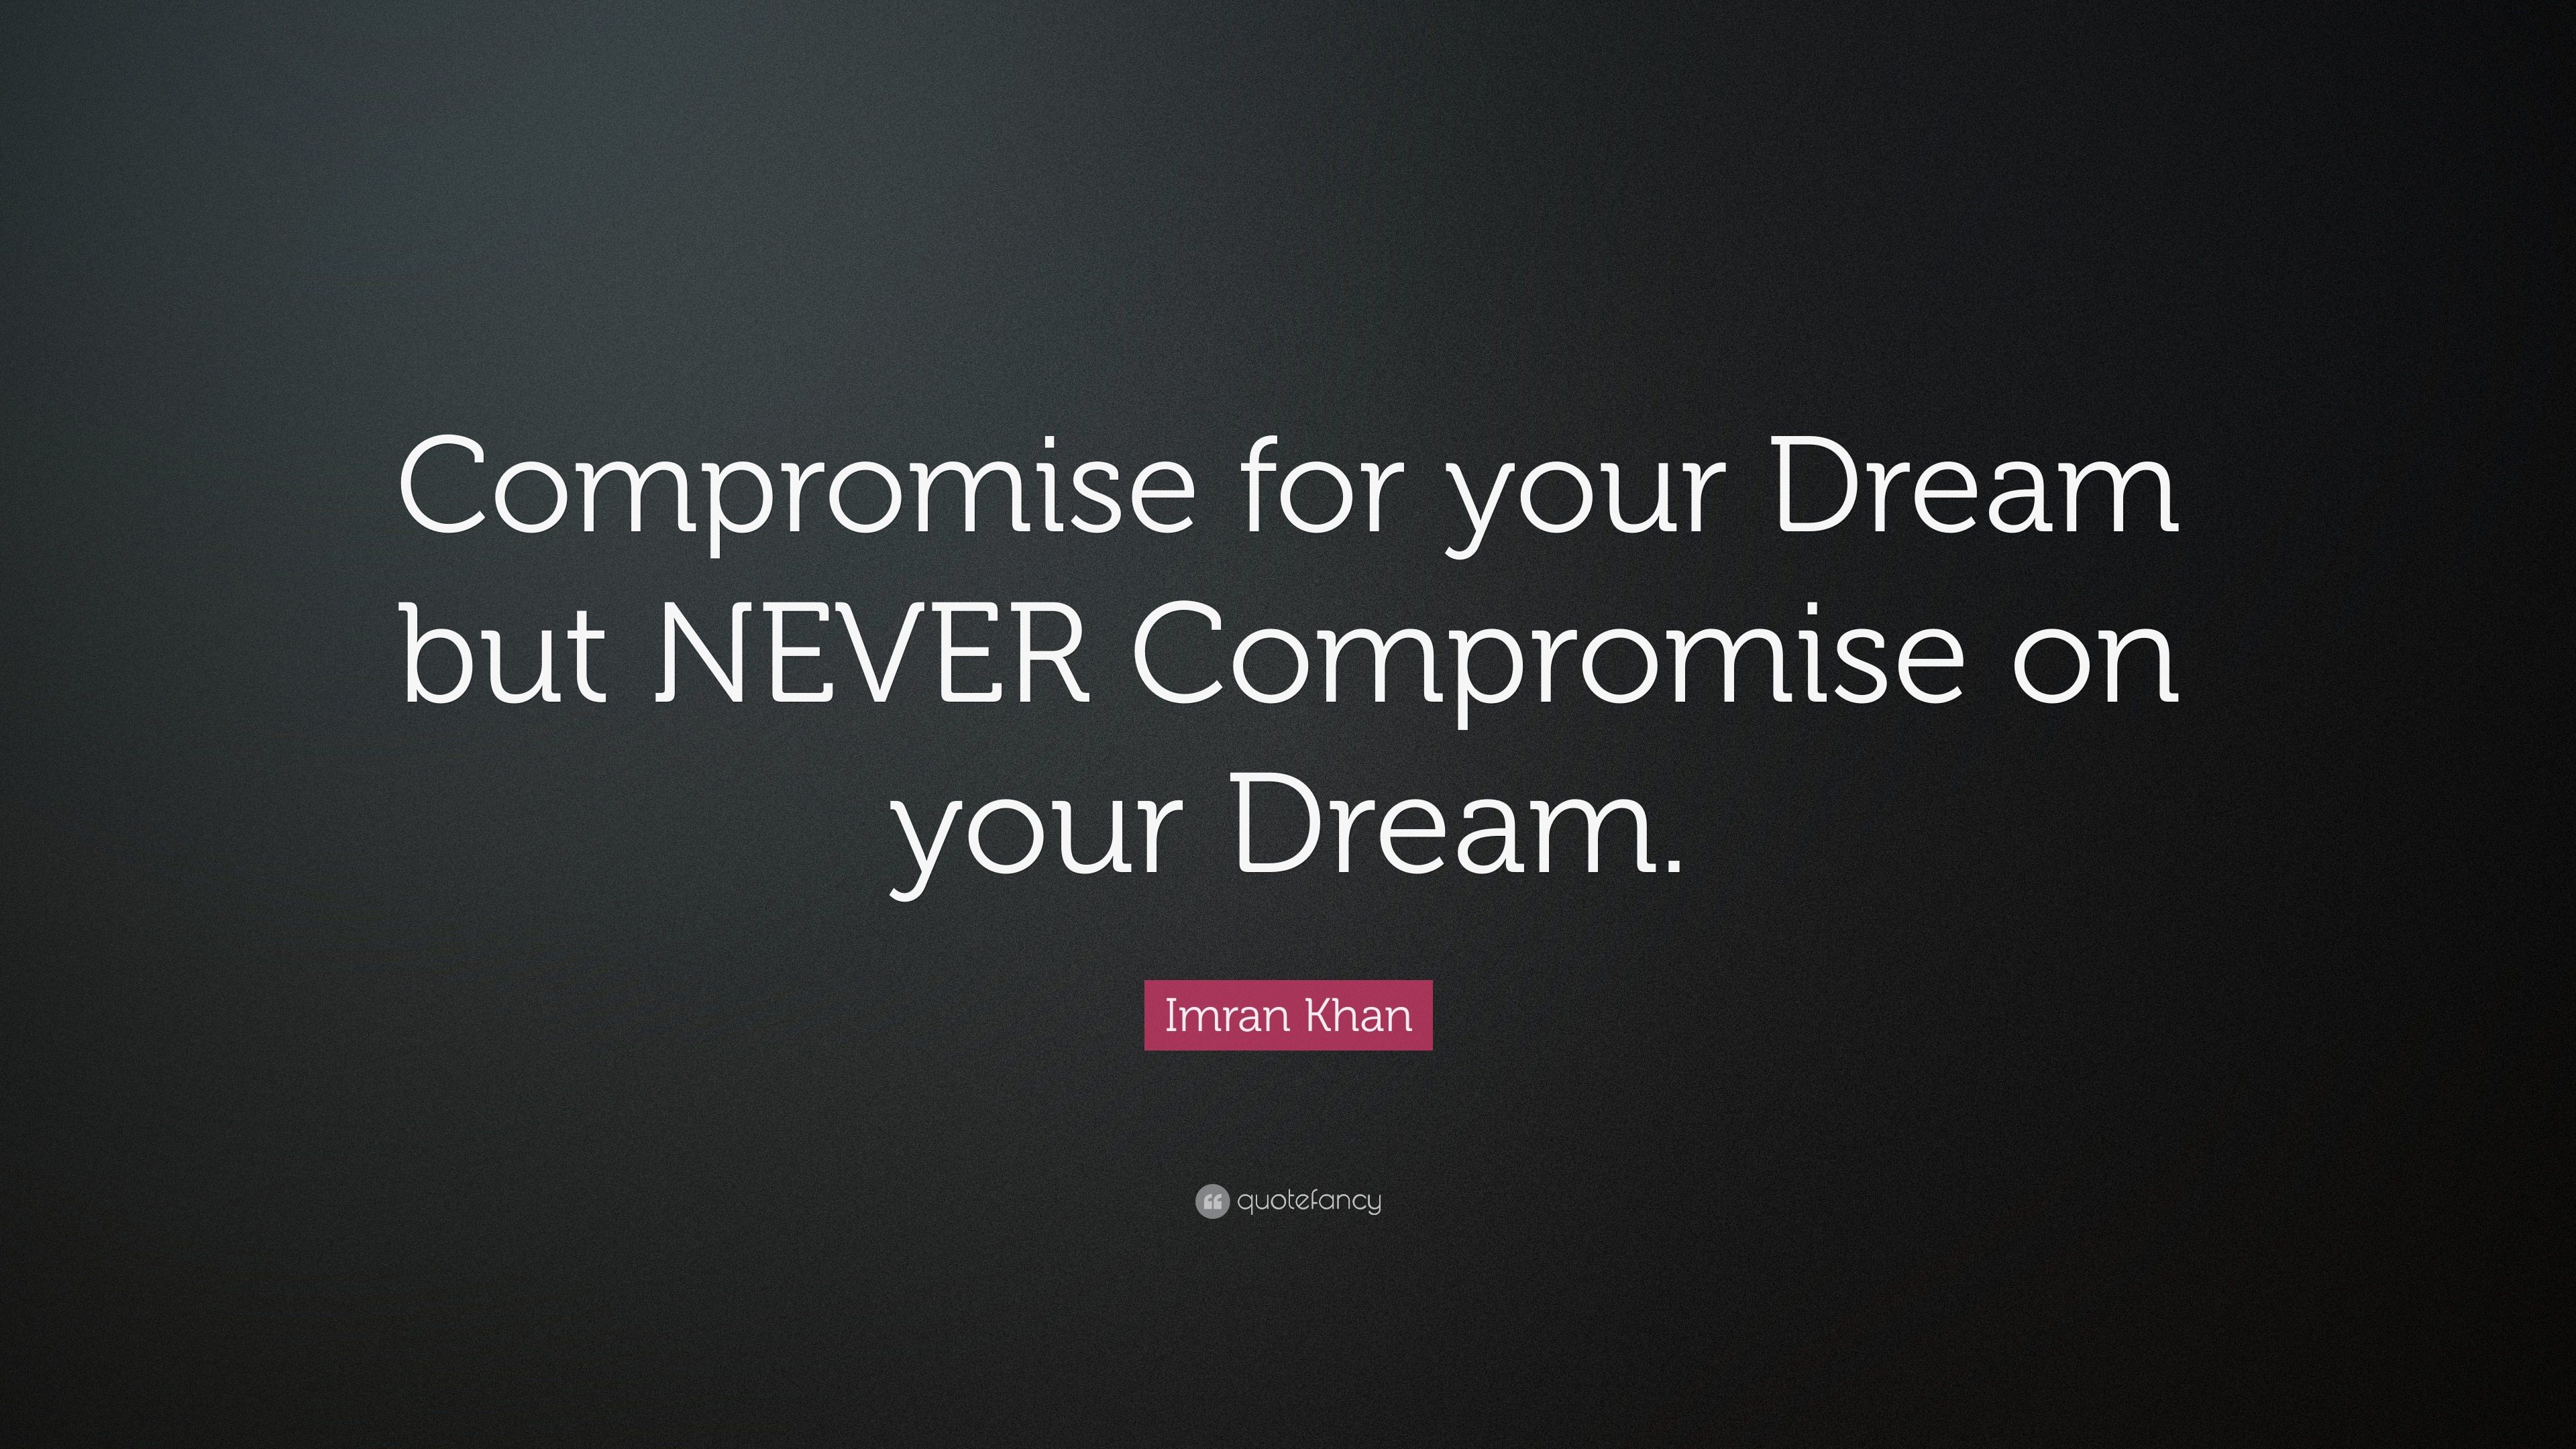 Inspirational and motivational tag line saying No compromise in a